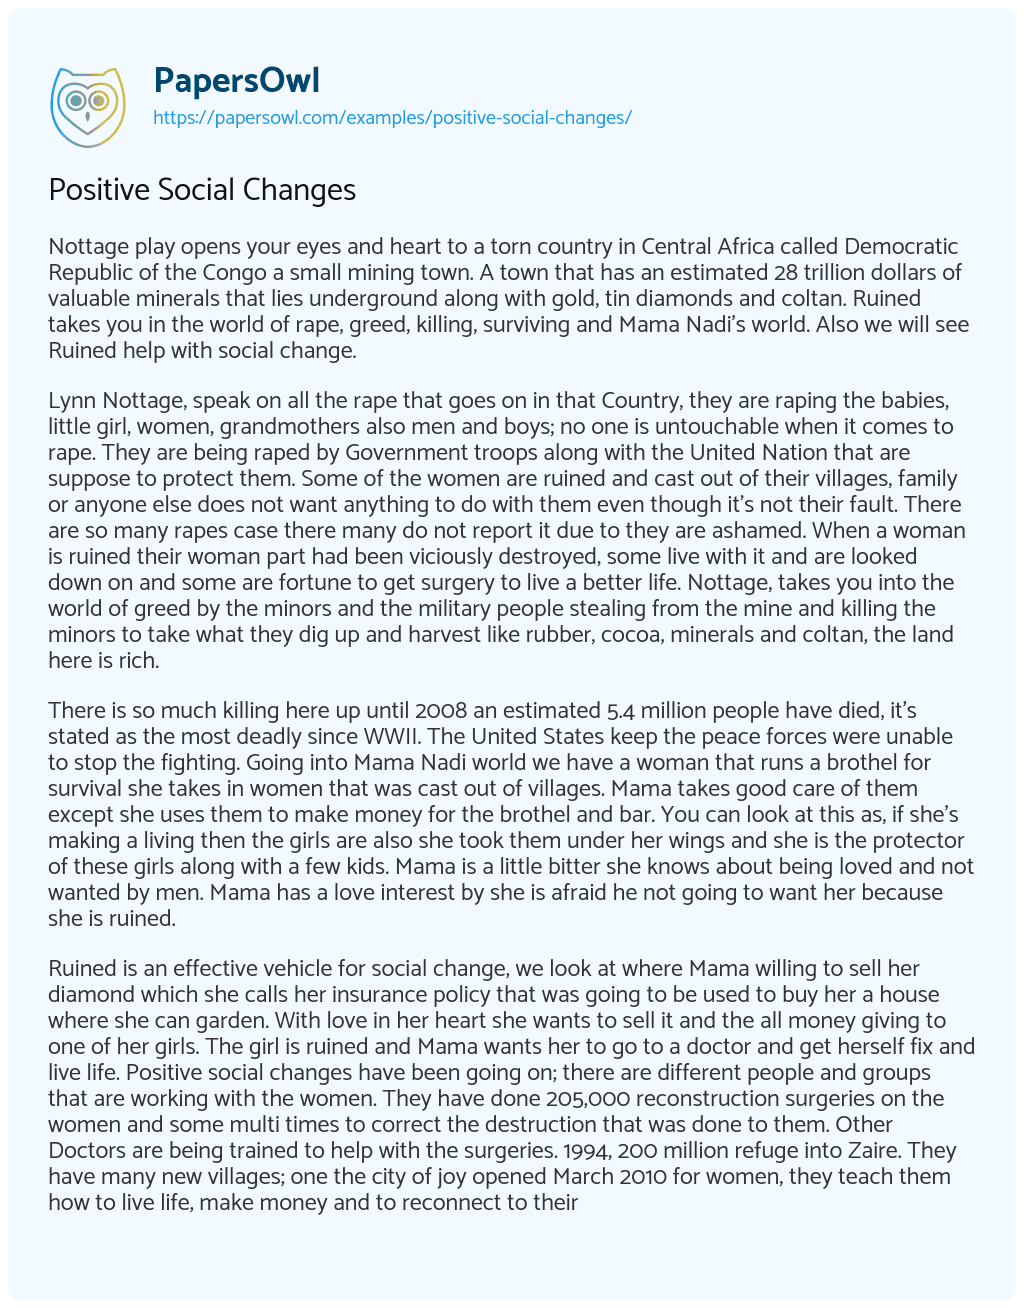 Essay on Positive Social Changes